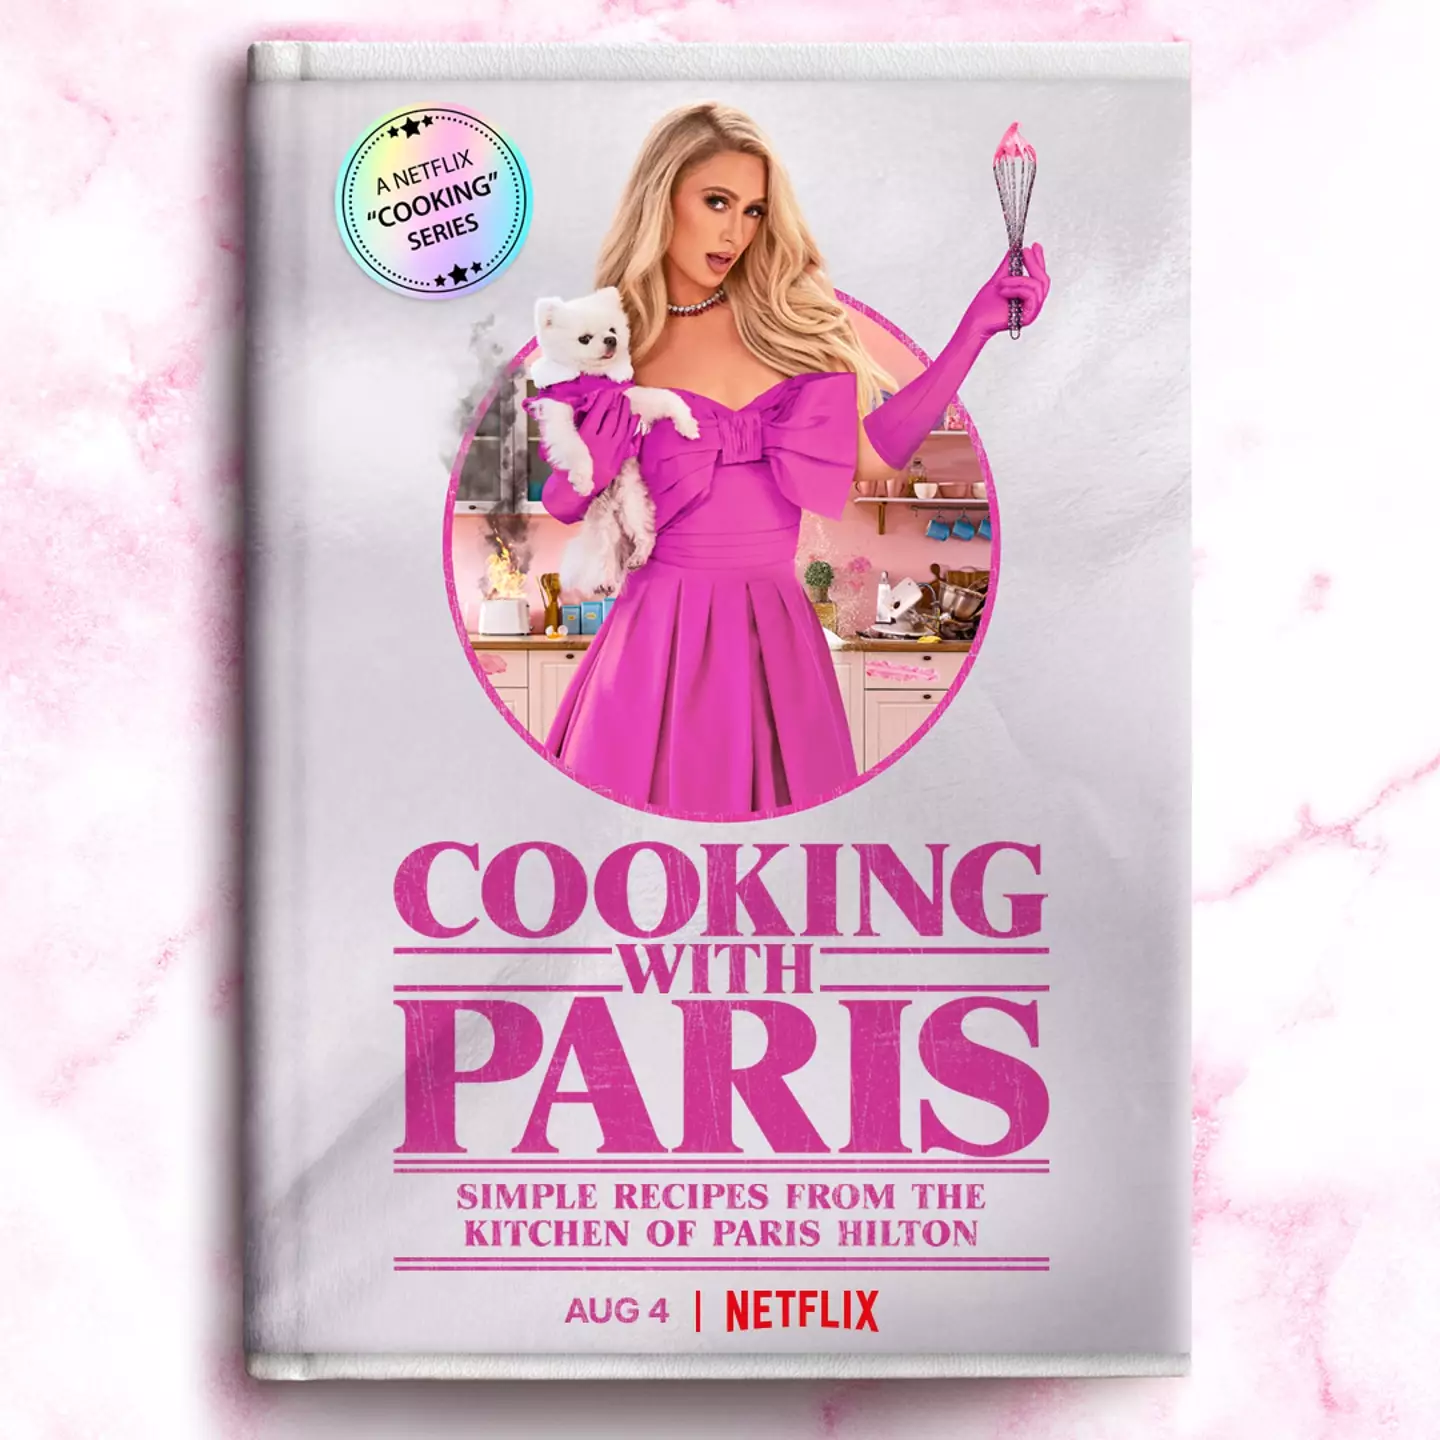 Paris unveiled the poster for her brand new Netflix cooking show (